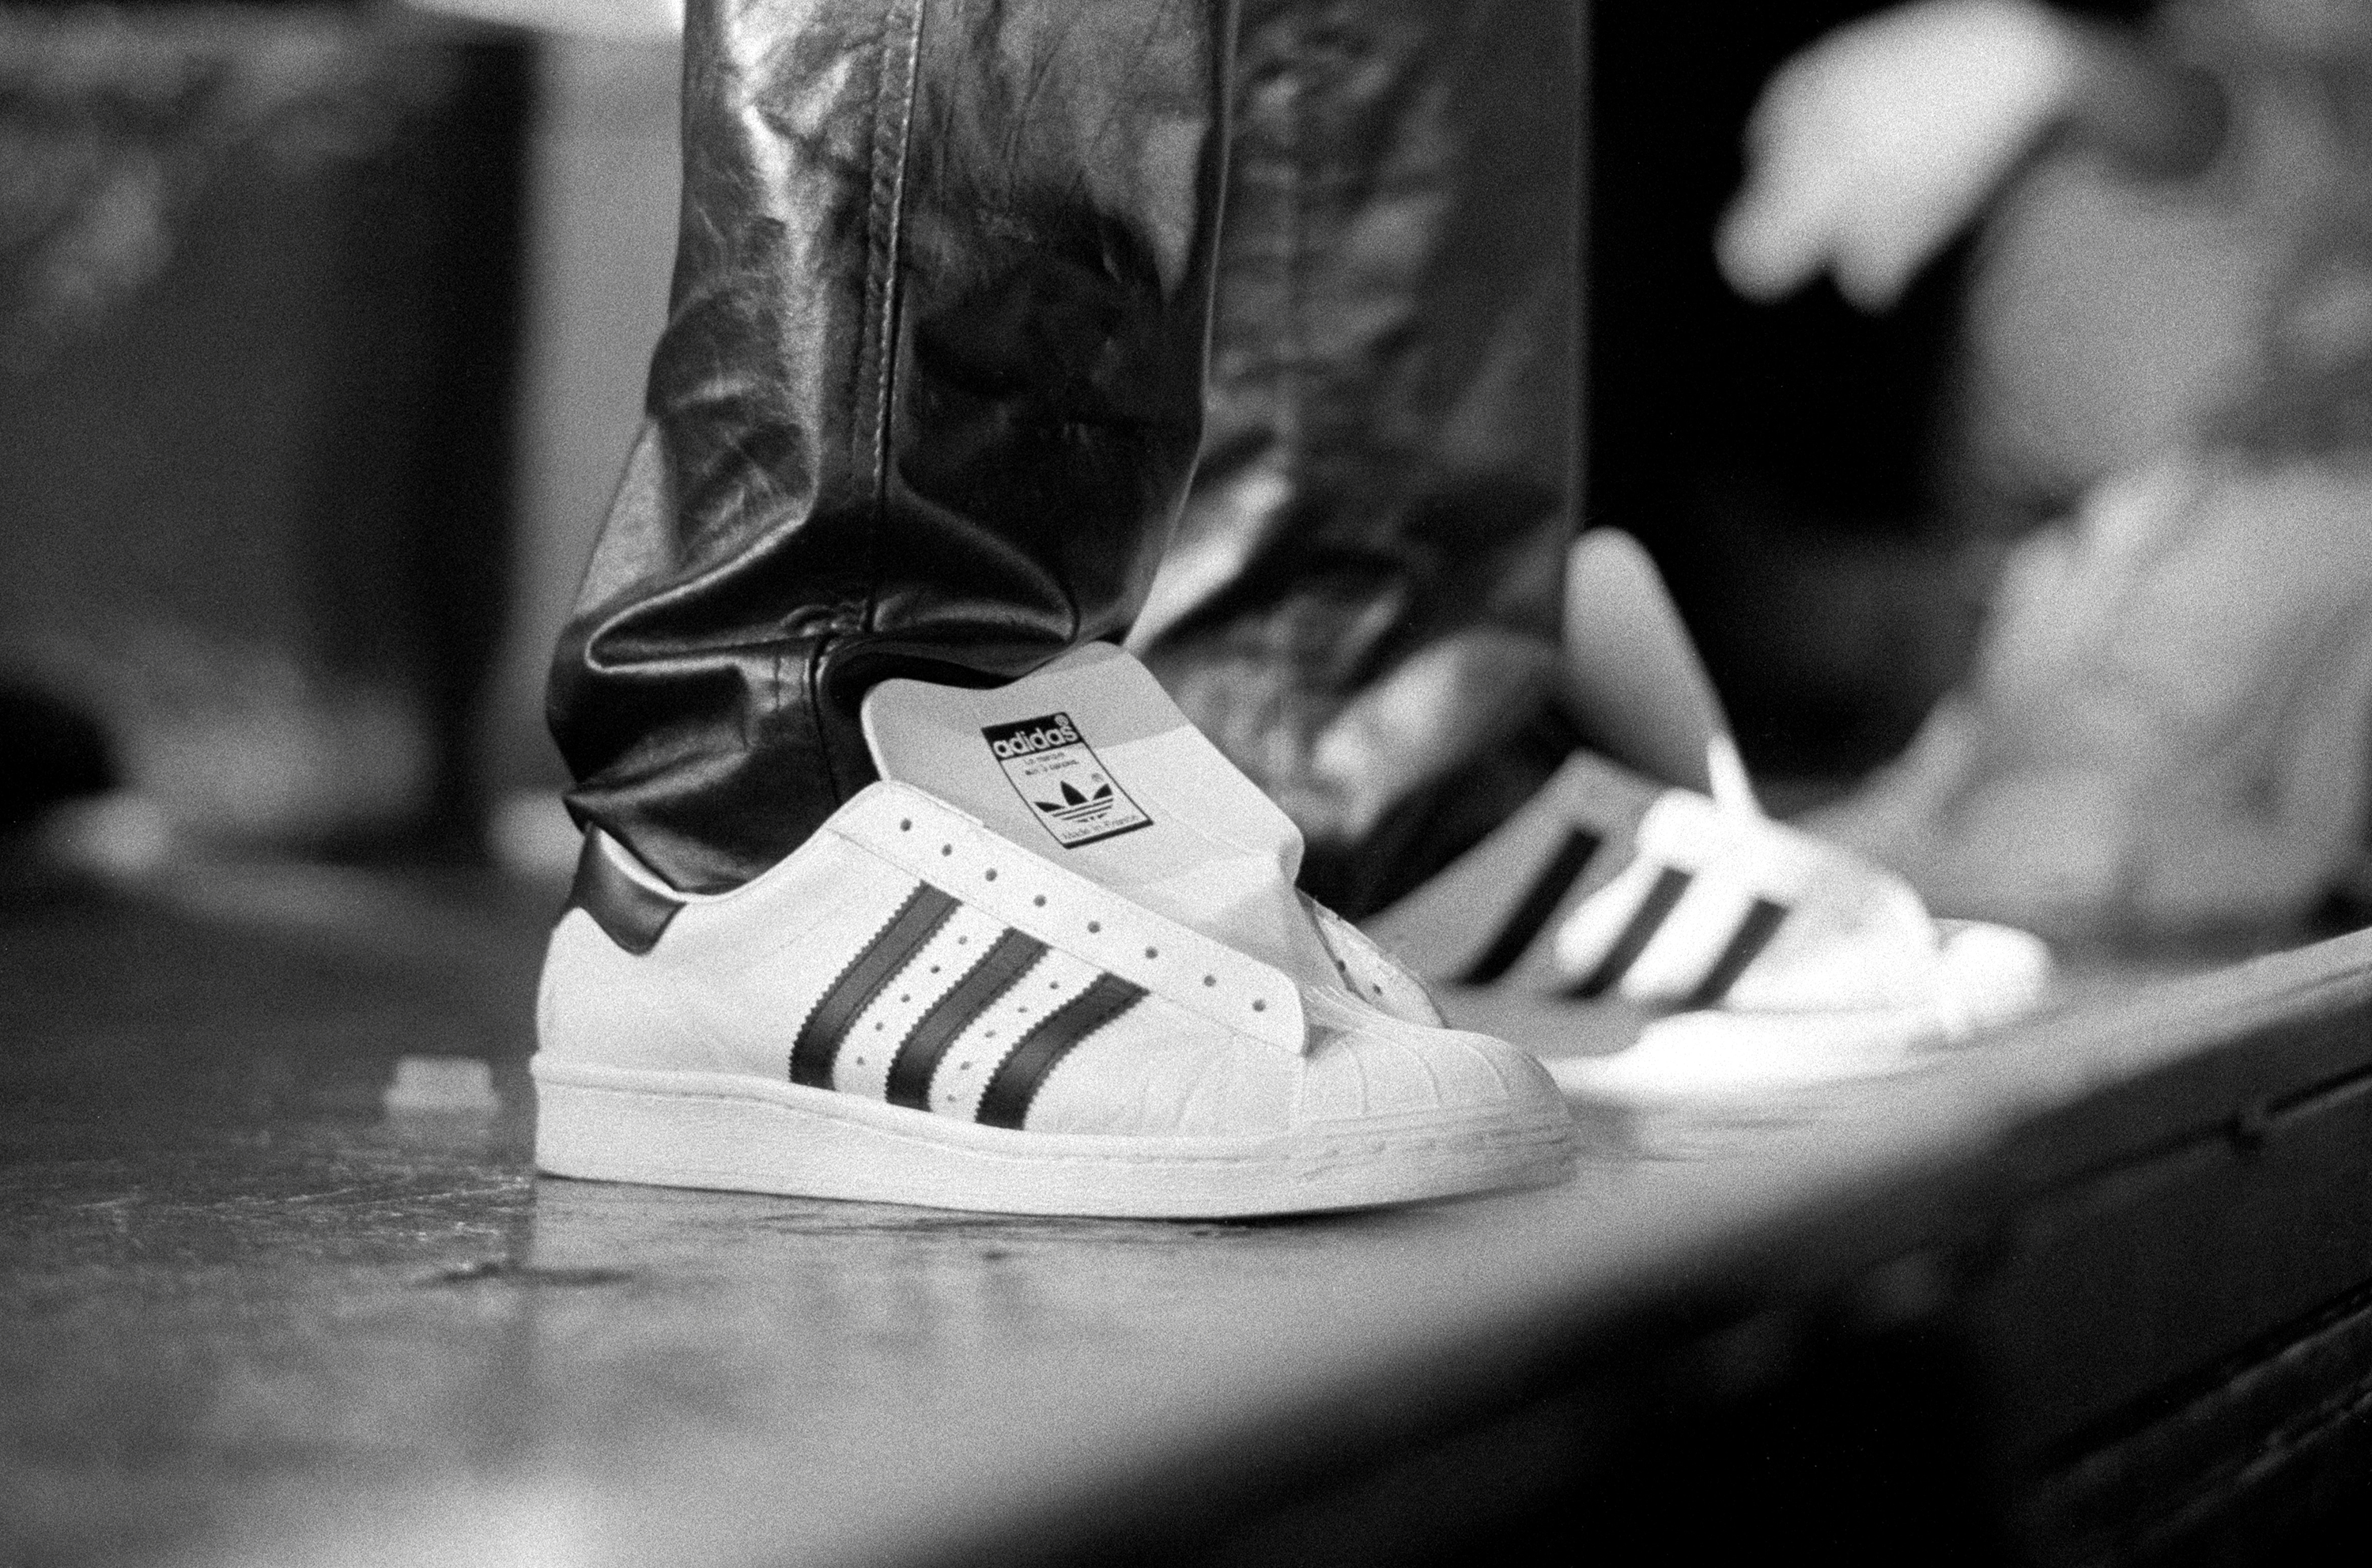 Run DMC Adidas Superstars with no laces, worn onstage in 1986